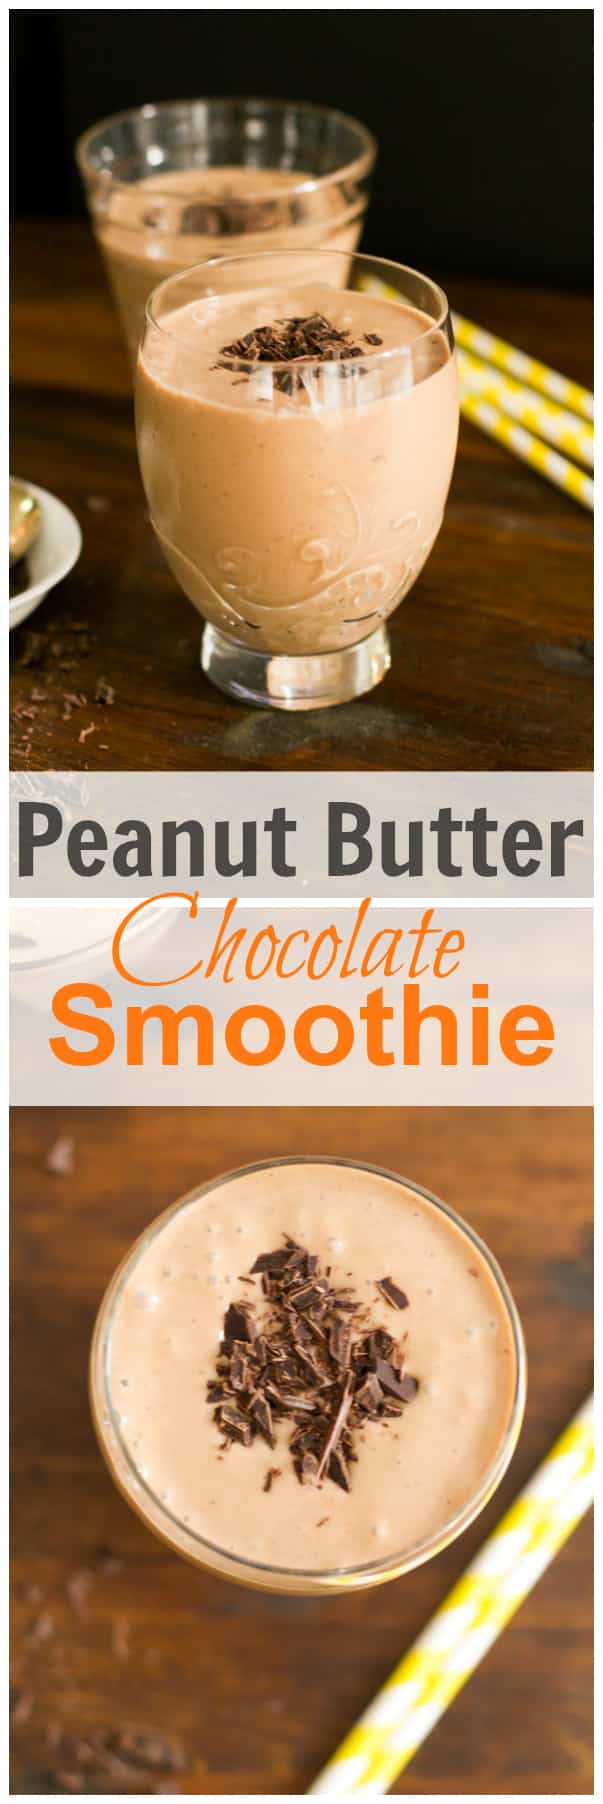 peanut butter chocolate smoothie1